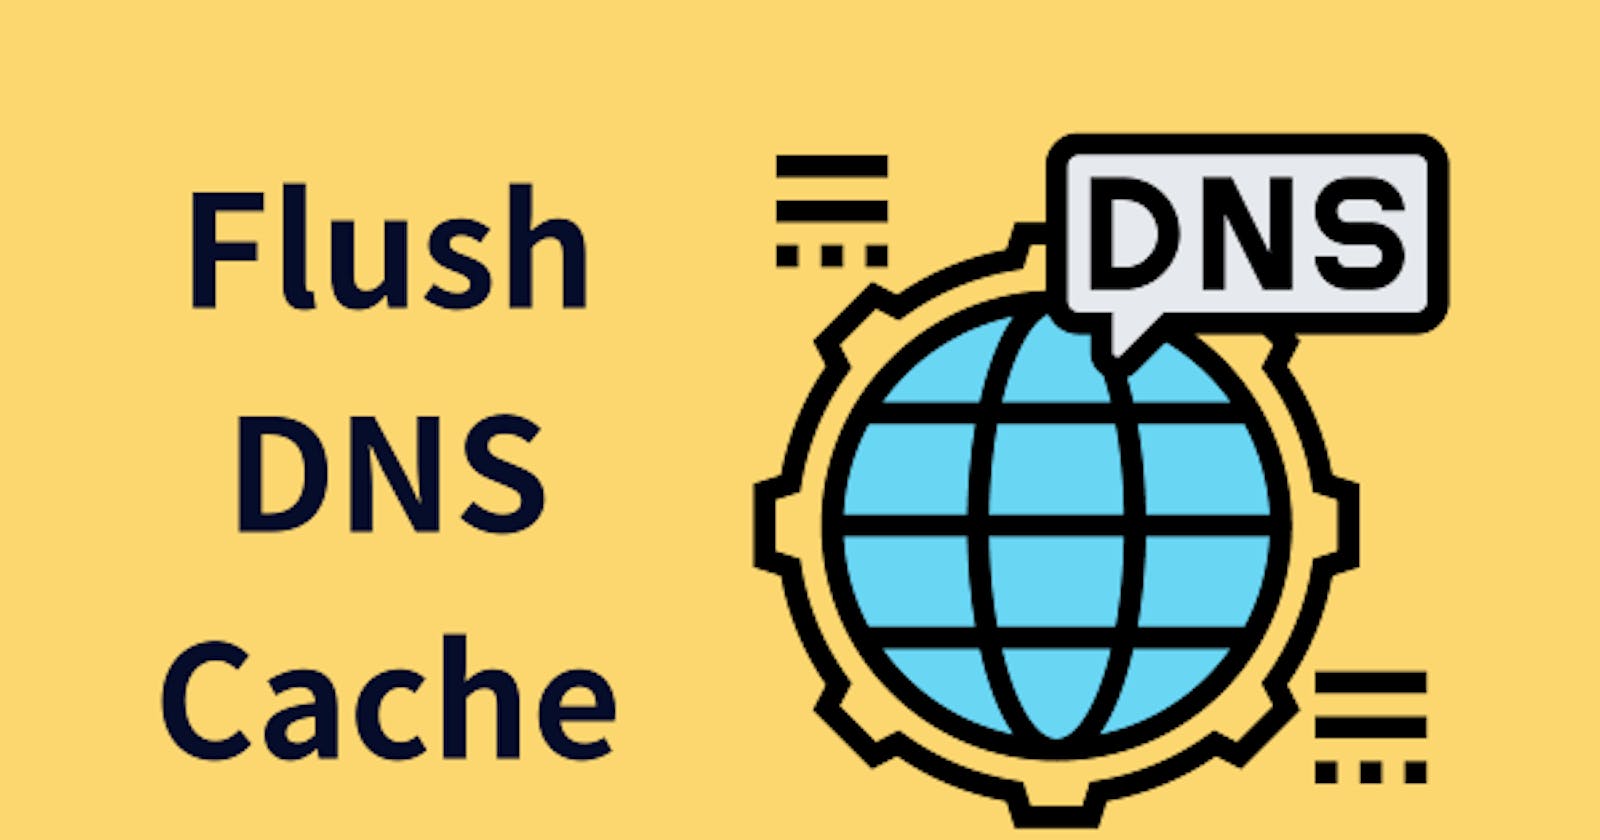 Flush DNS Cache: Step-by-Step Instructions